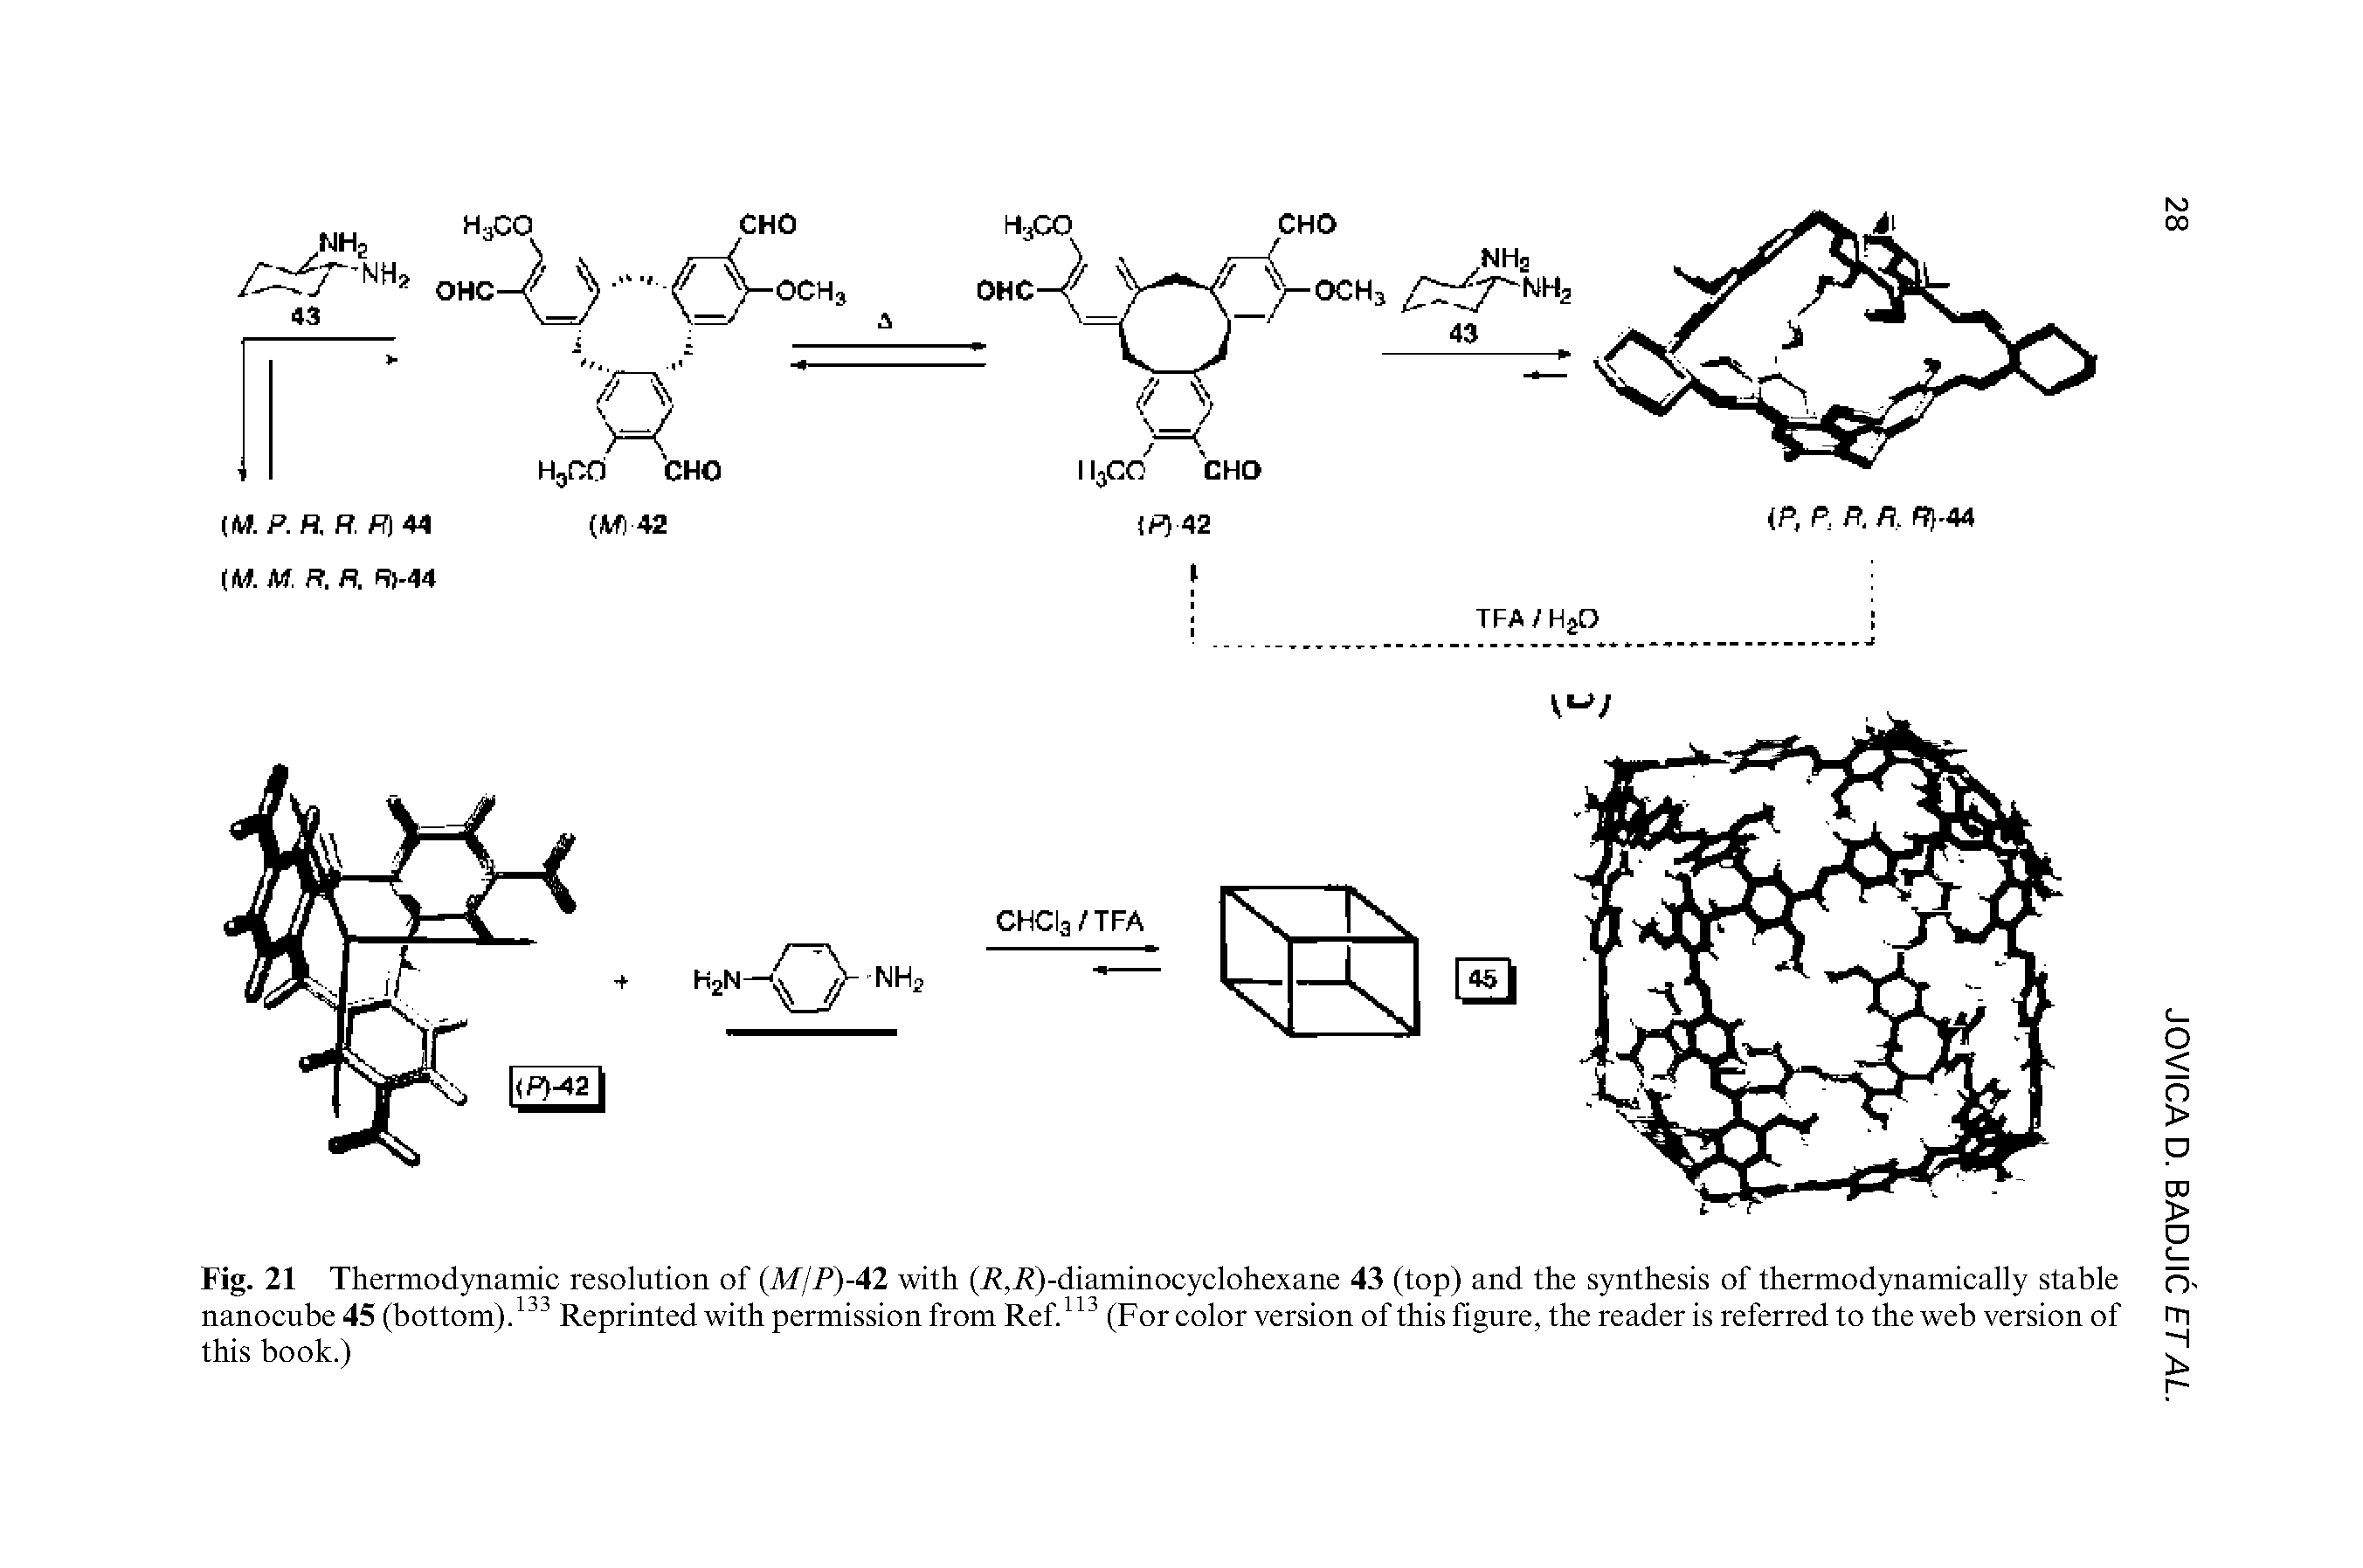 Fig. 21 Thermodynamic resolution of (M/P)-42 with (i, i )-diaminocyclohexane 43 (top) and the synthesis of thermodynamically stable nanocube 45 (bottom).133 Reprinted with permission from Ref.113 (For color version of this figure, the reader is referred to the web version of this book.)...